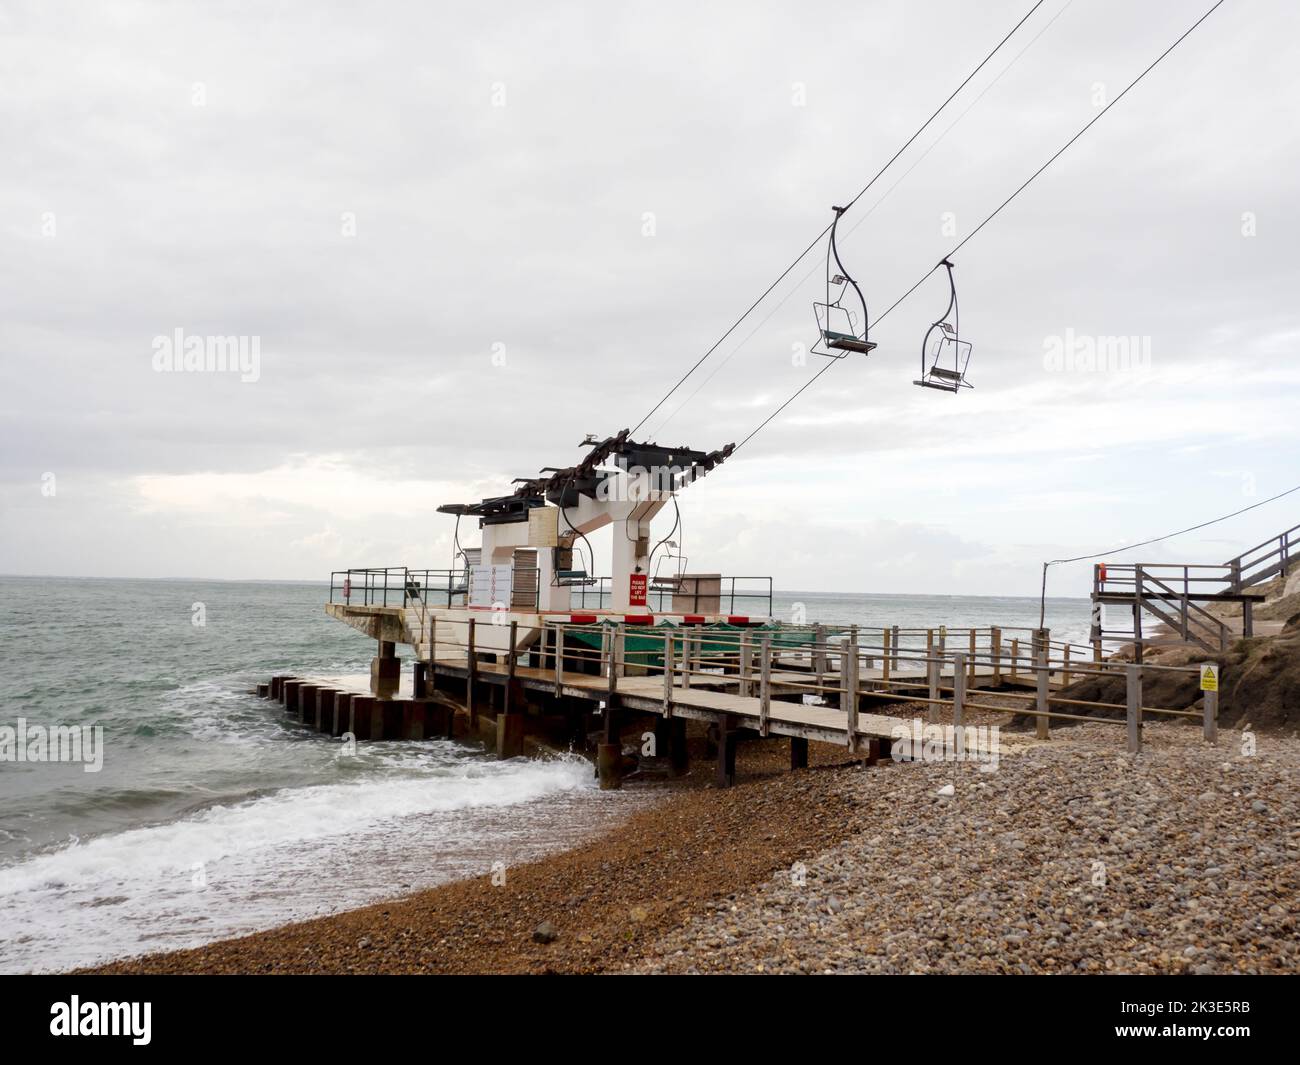 A chairlift down to Alum bay on the Isle of White, UK. Stock Photo